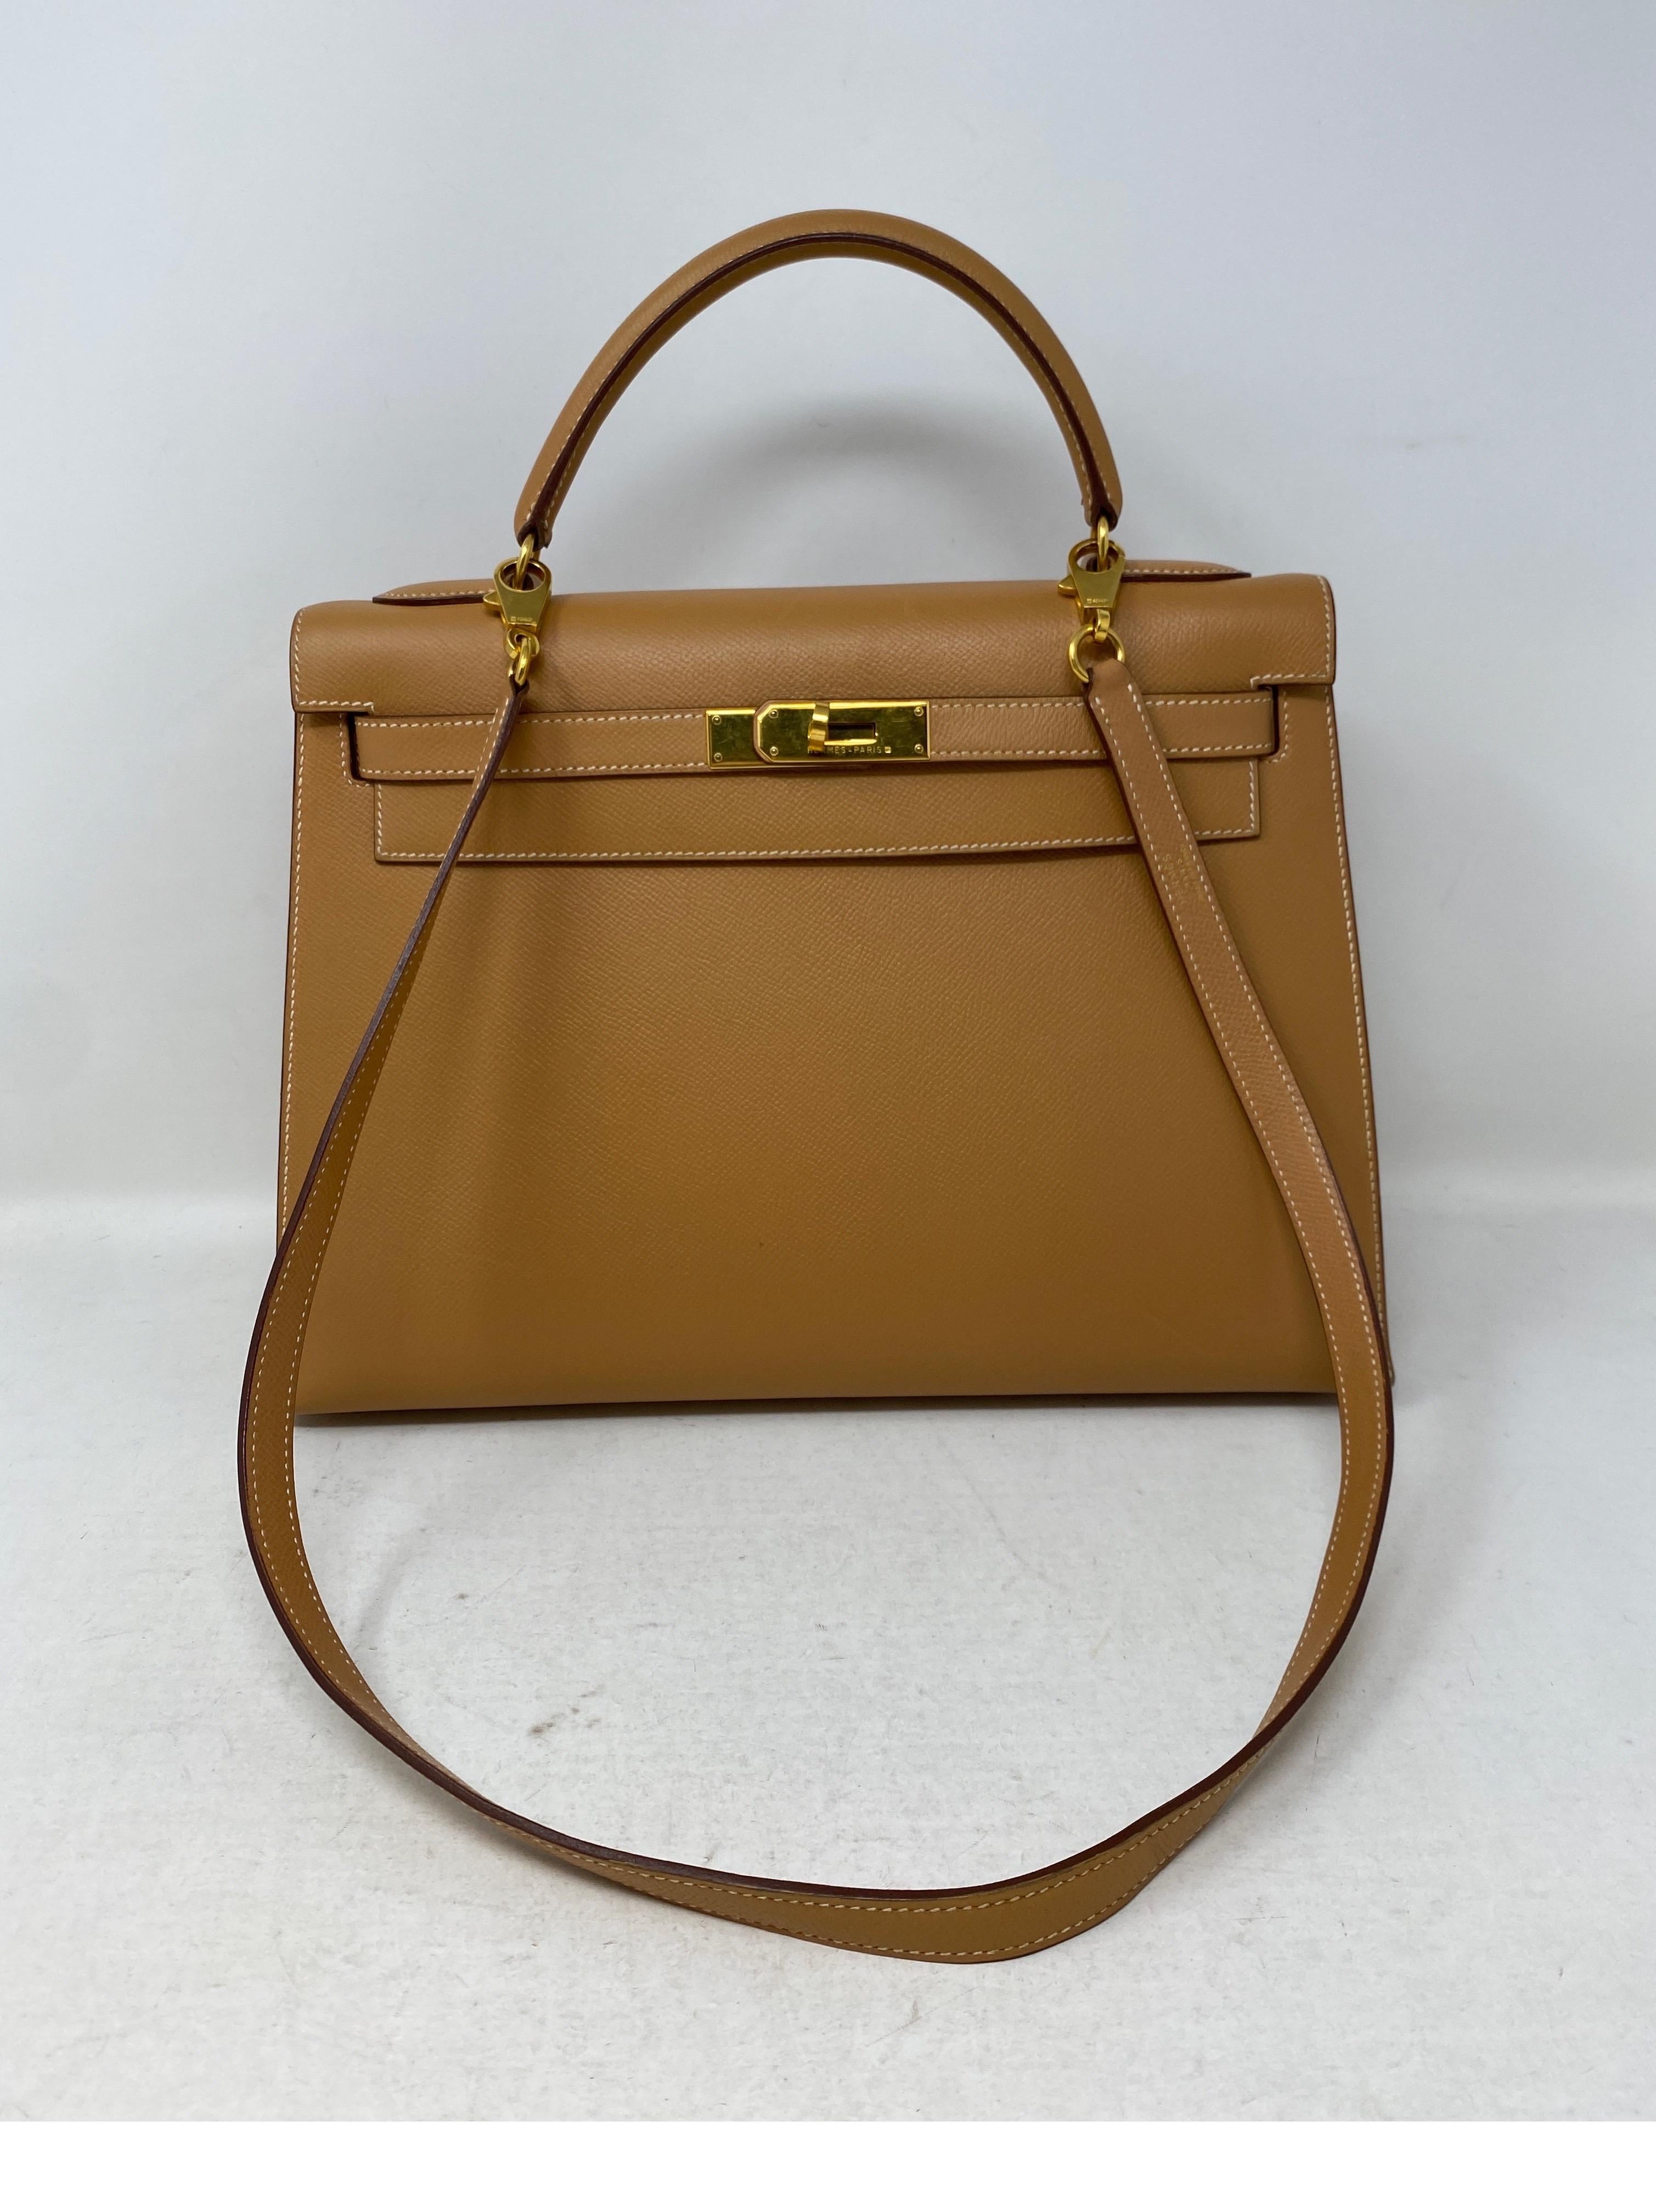 Hermes Kelly Sellier 32 Bag. Excellent condition. Gorgeous Kelly Bag. Rare size 32. Natural tan color. Gold hardware. Sellier is rare and sought after. Keeps it's shape nicely. Great investment bag. Don't miss out on this one. Includes clochette,